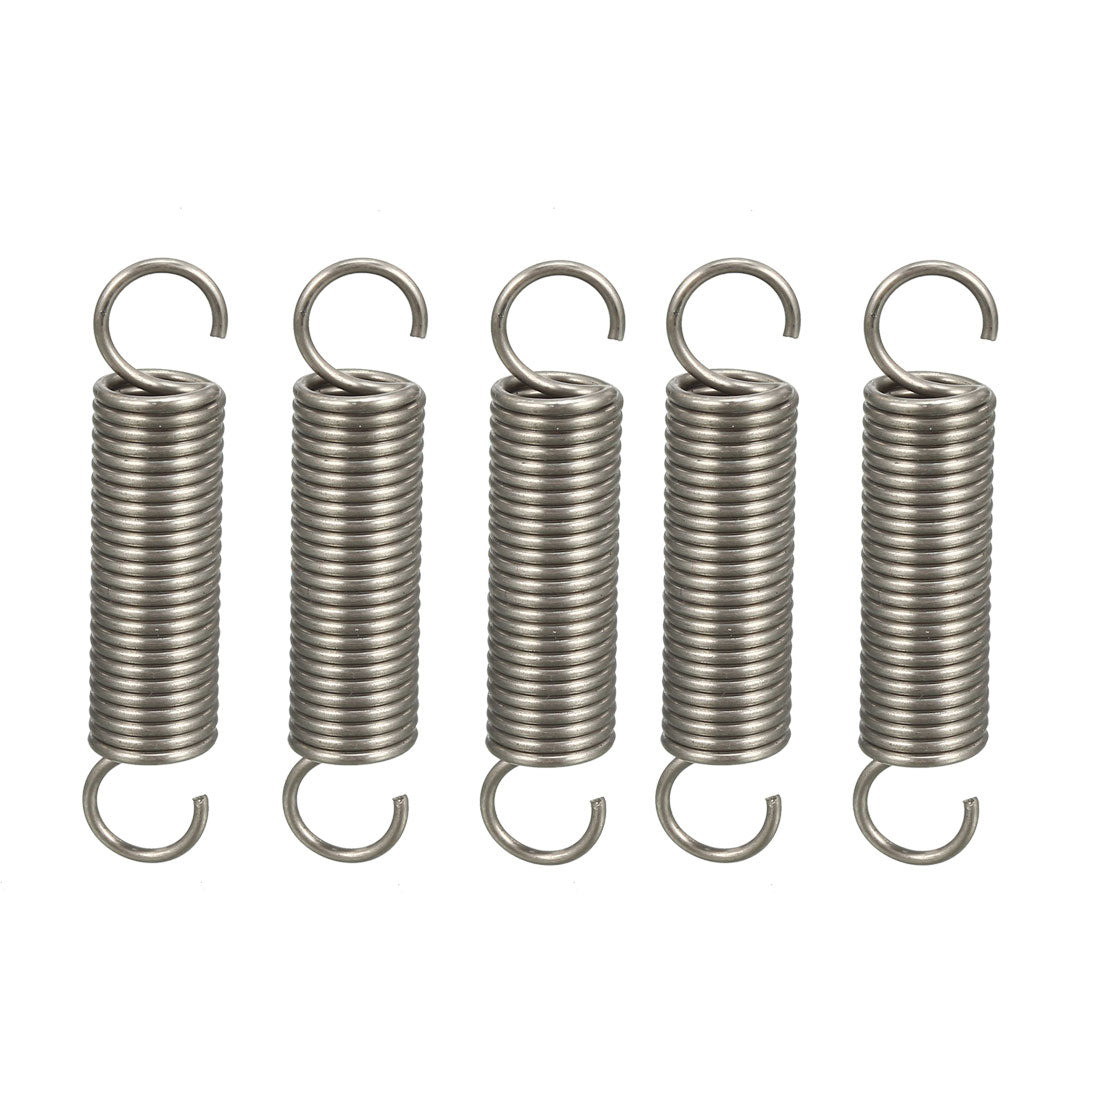 uxcell Uxcell Extended Tension Spring Wire Diameter 0.047", OD 0.39", Free Length 1.97" 5pcs